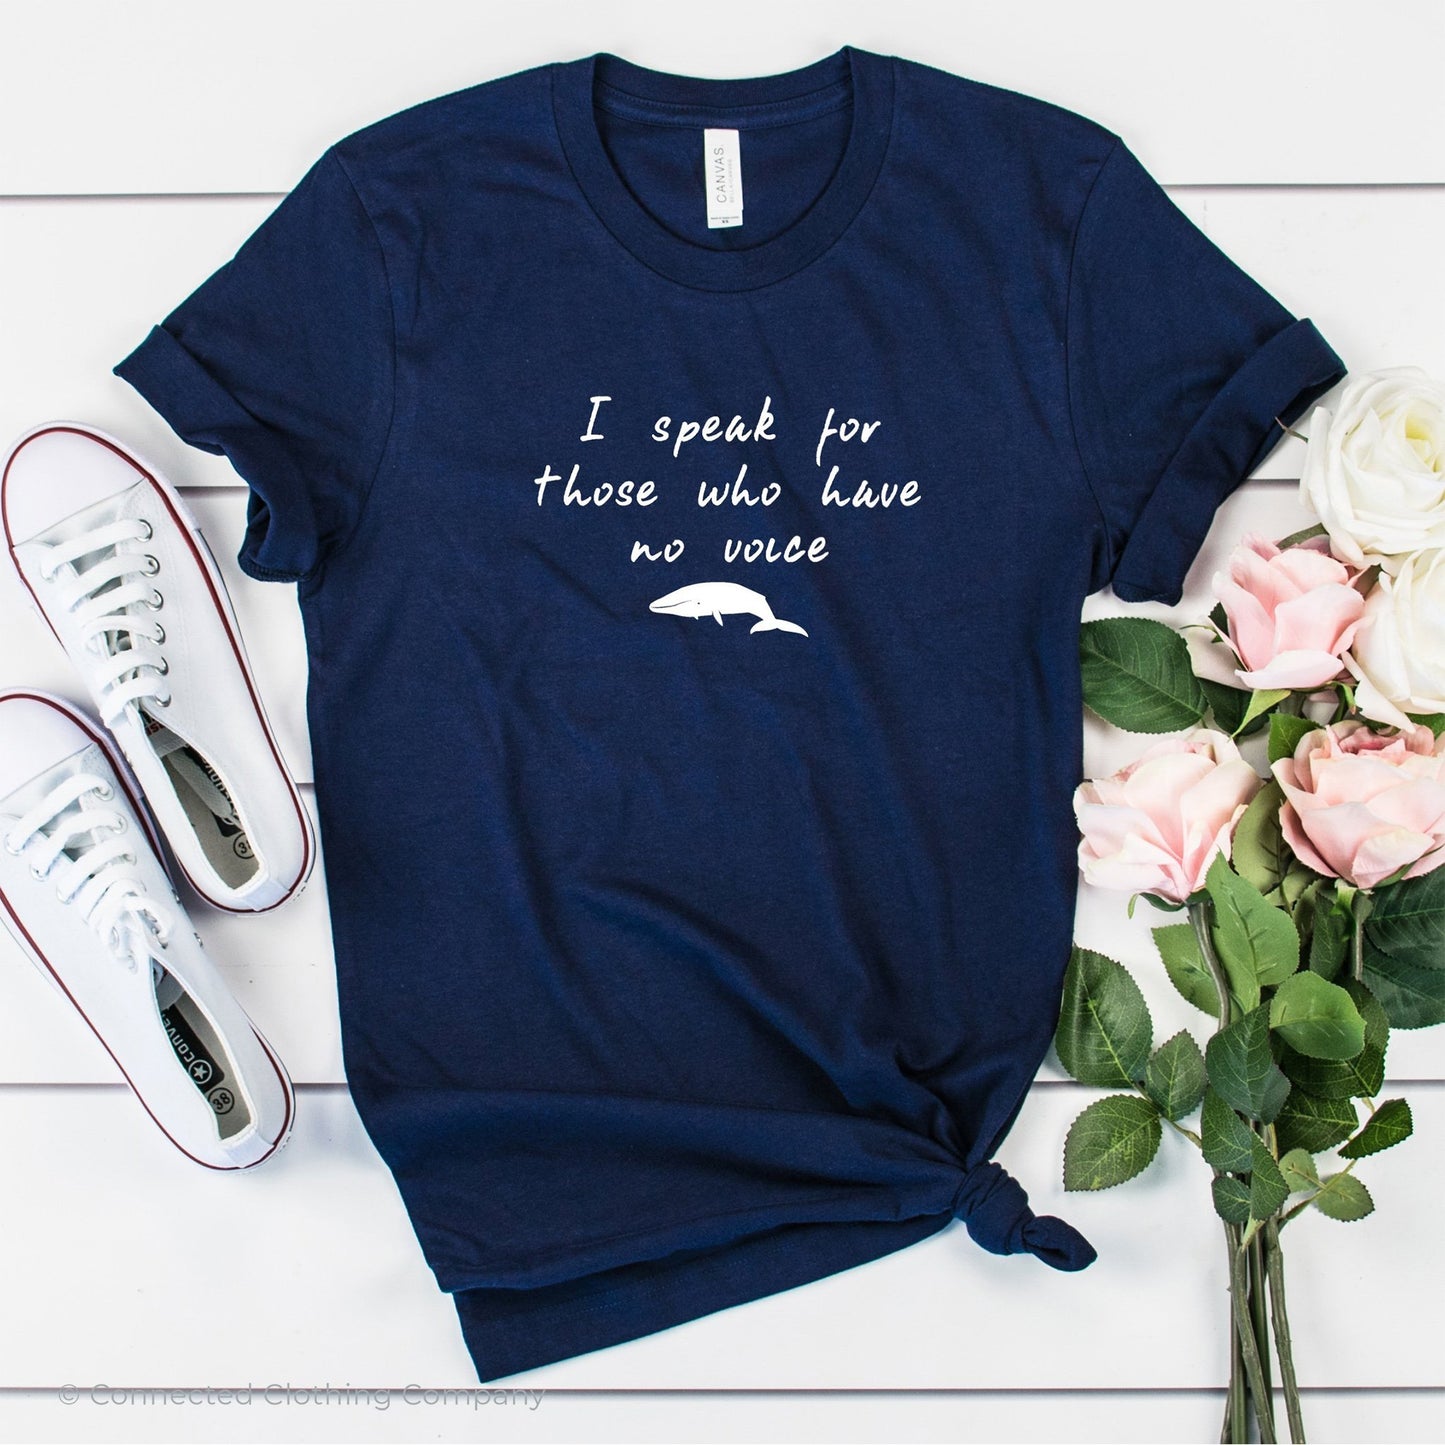 Be The Voice Whale Unisex Short-Sleeve Tee in Navy - Connected Clothing Company donates 10% of the profits from this t-shirt to Mission Blue ocean conservation